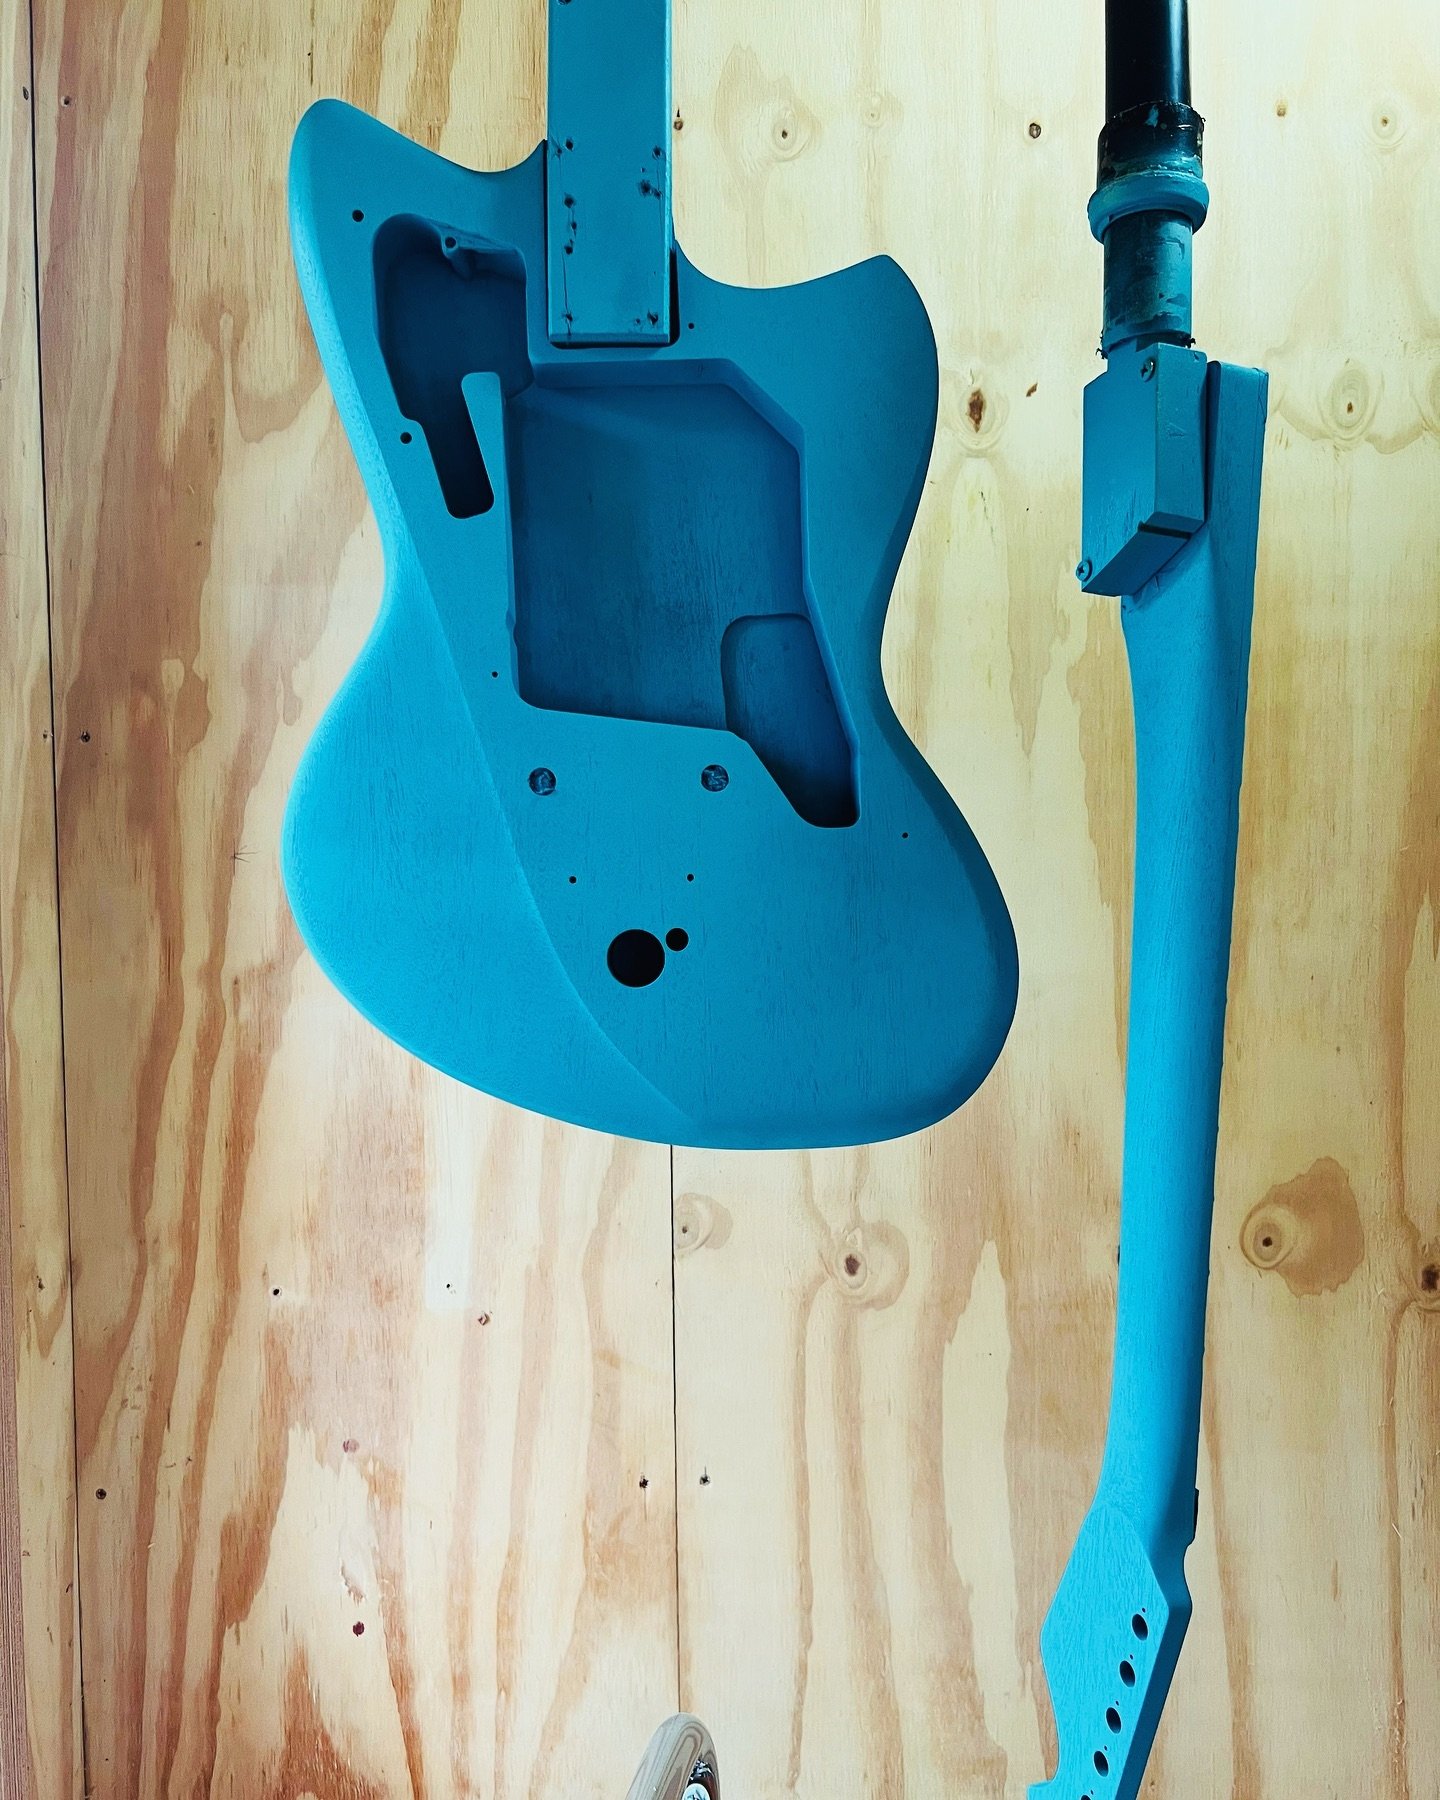 Lovely Cyan base coat on this open grained finish Spellbinder Custom with matching neck. This one&rsquo;s going to pop!

#highendguitars
#instaguitar 
#blueguitar 
#offsetguitars
#cyan